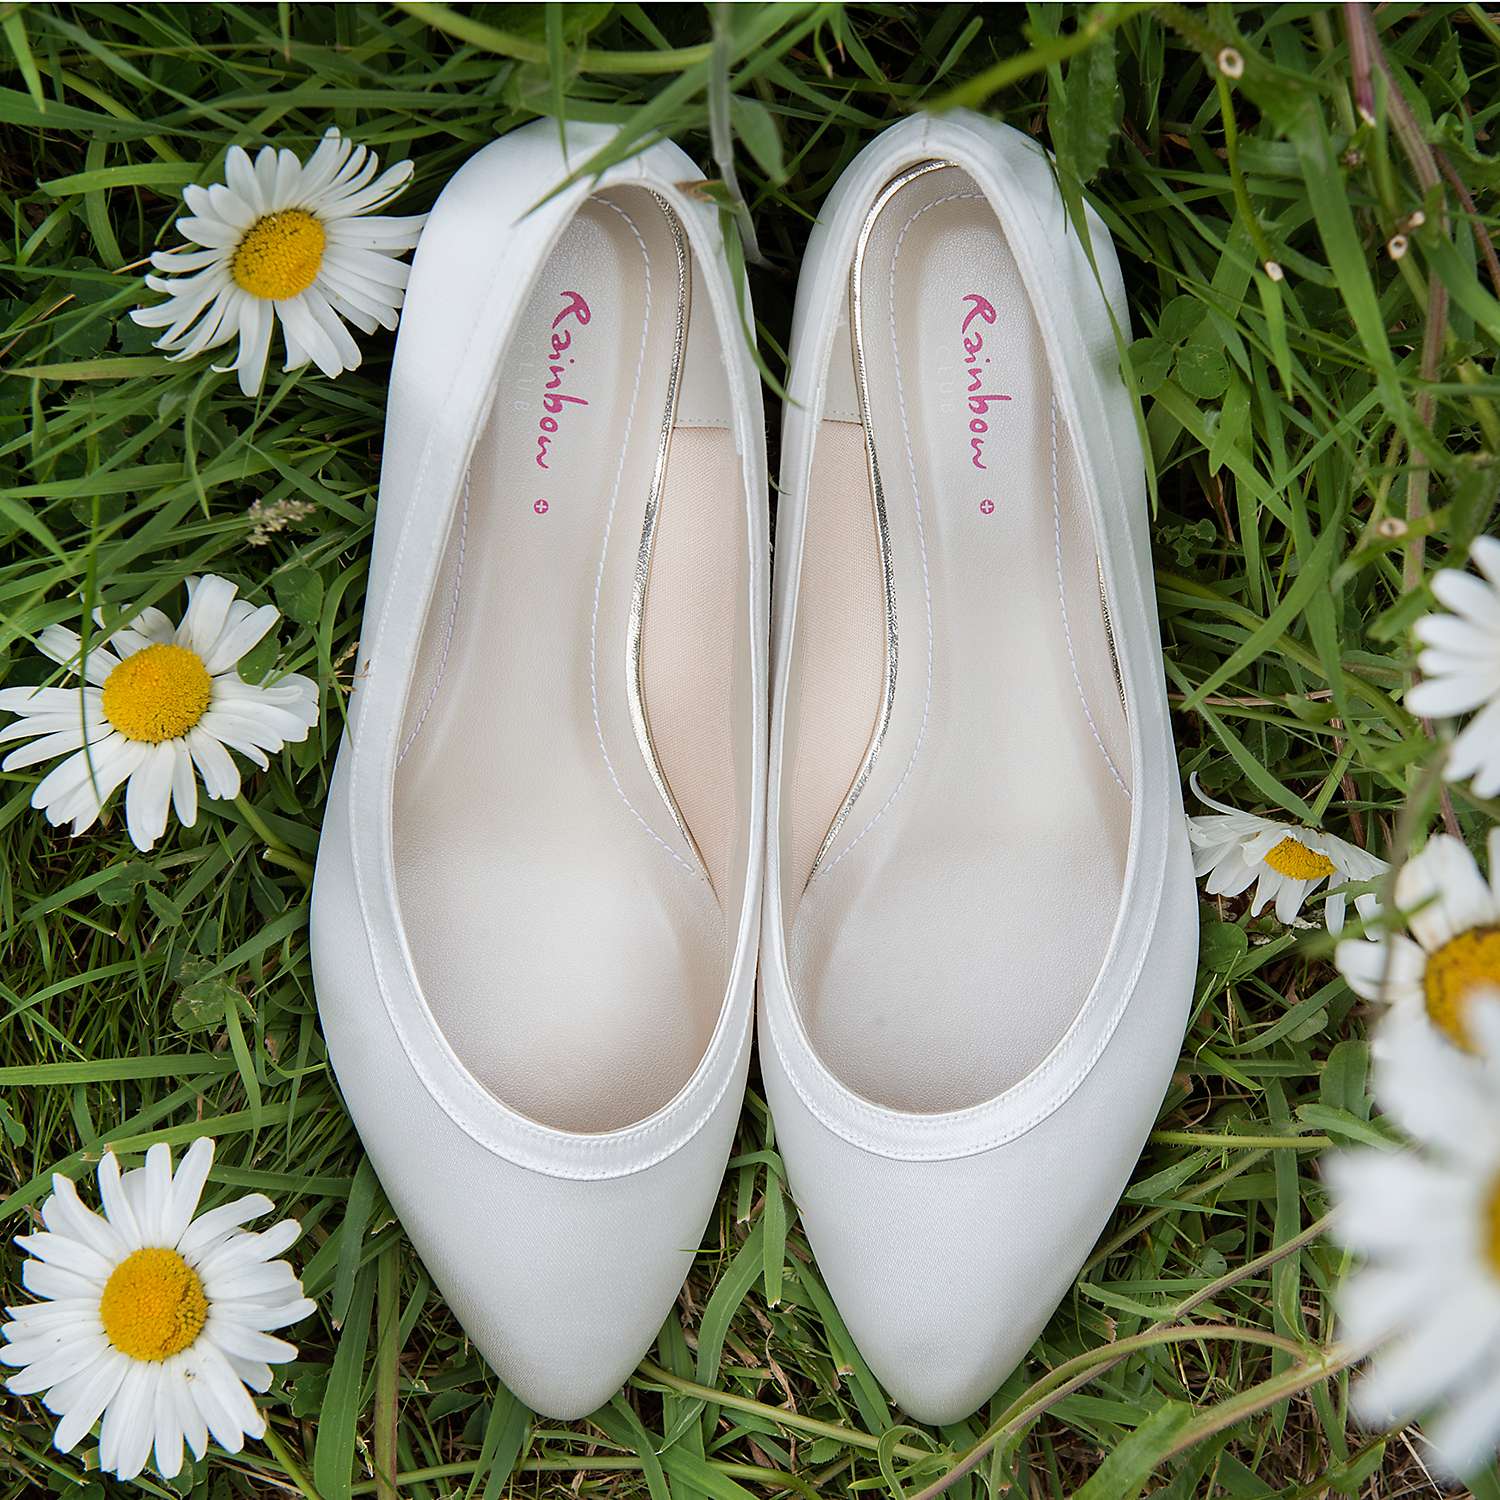 Buy Rainbow Club Gisele Wide Fit Court Shoes, Ivory Online at johnlewis.com